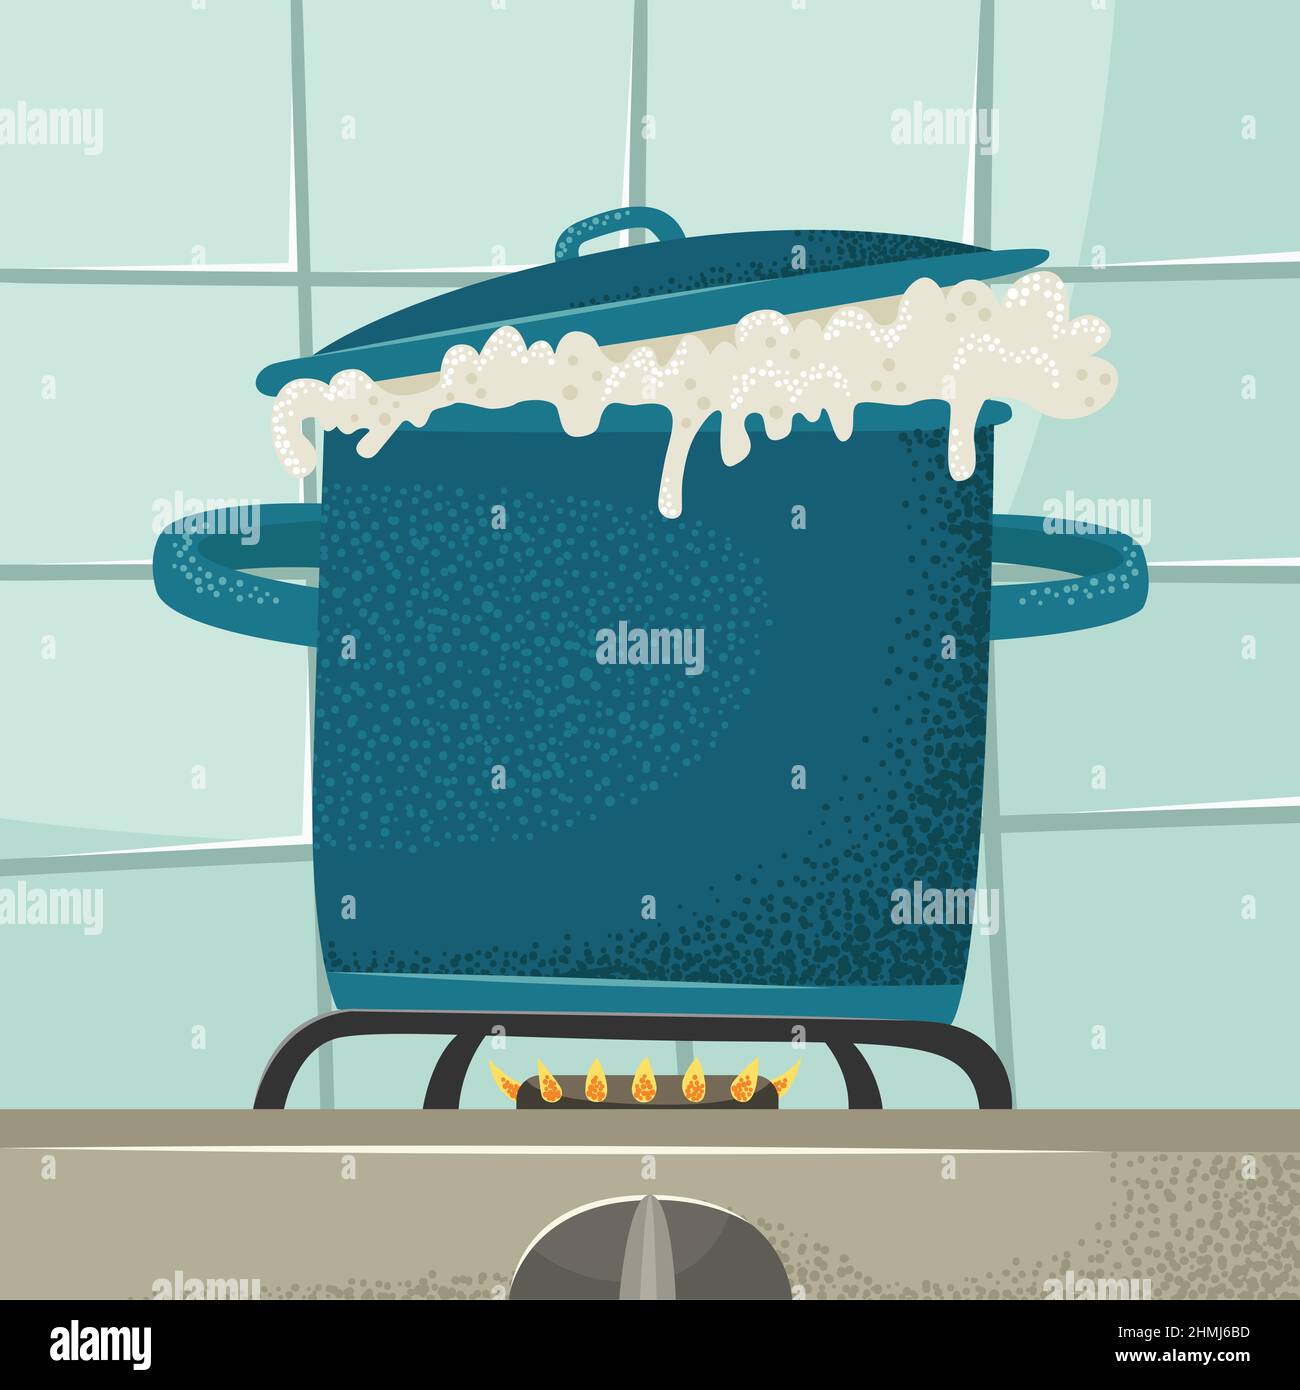 Boiling water Stock Vector Images - Alamy